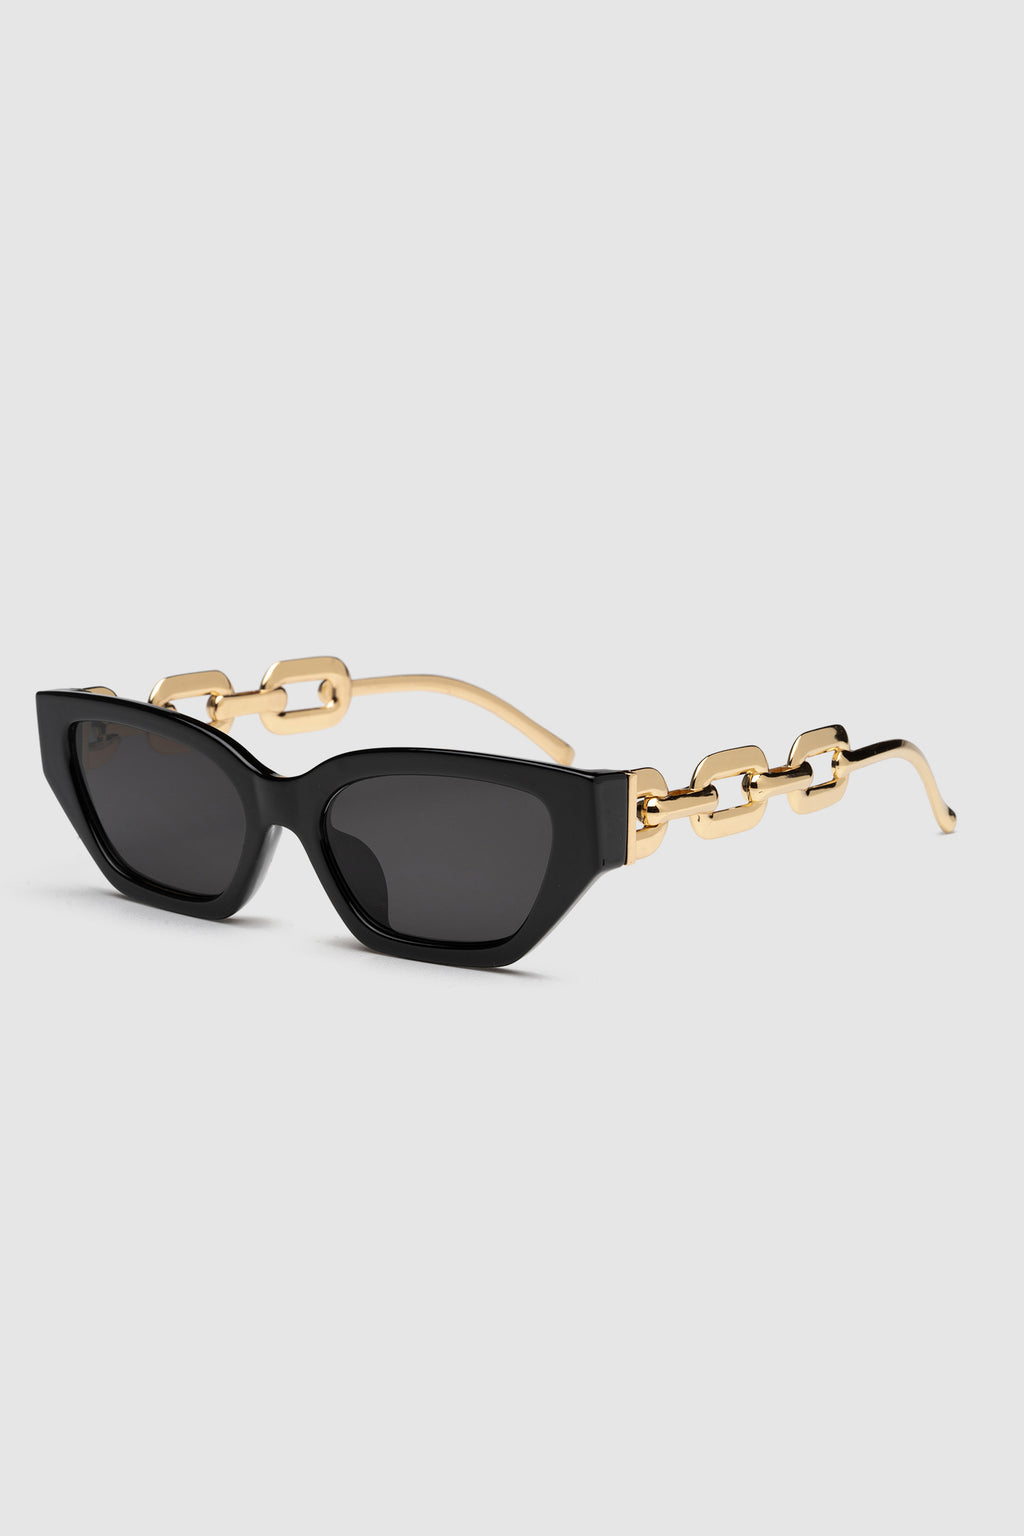 Cat Eyes with Gold Chain Arms - Pink